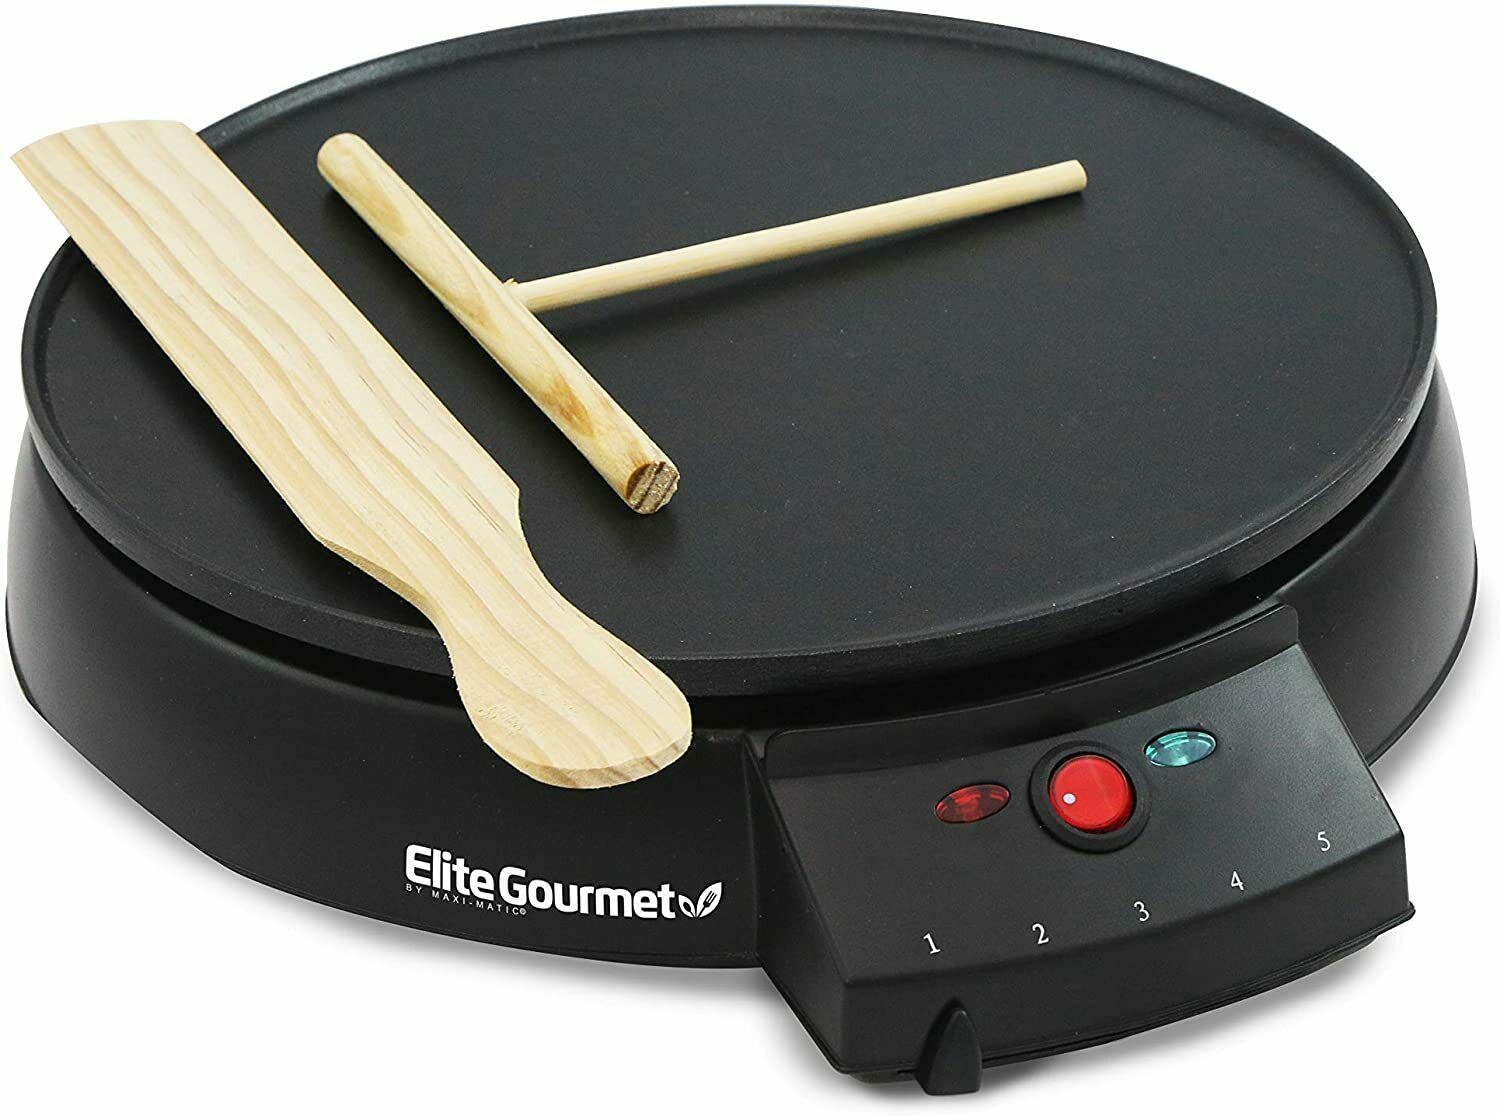 Elite Gourmet Electric Crepe Maker Pancake, Hot Cakes And Non-stick Griddle New